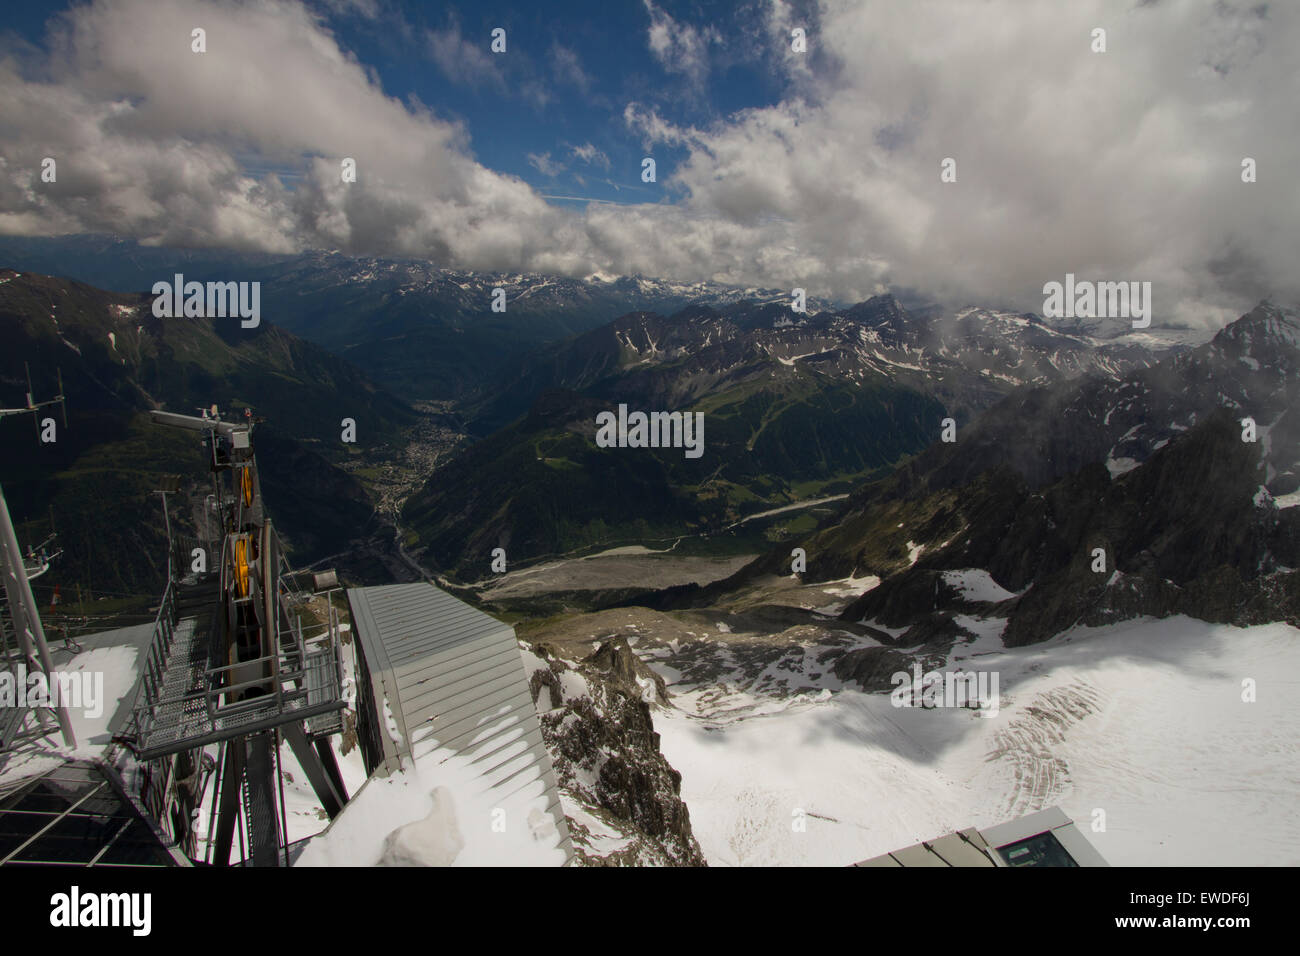 Courmayeur, Italy. 23rd June, 2015. Panoramic view of Courmayeur and Aosta Valley from the arrival station of Skyway cable car. The cableway connects the city of Courmayeur to Pointe Helbronner (3,466 m) in the Mont Blanc massif. © Marco Destefanis/Pacific Press/Alamy Live News Stock Photo